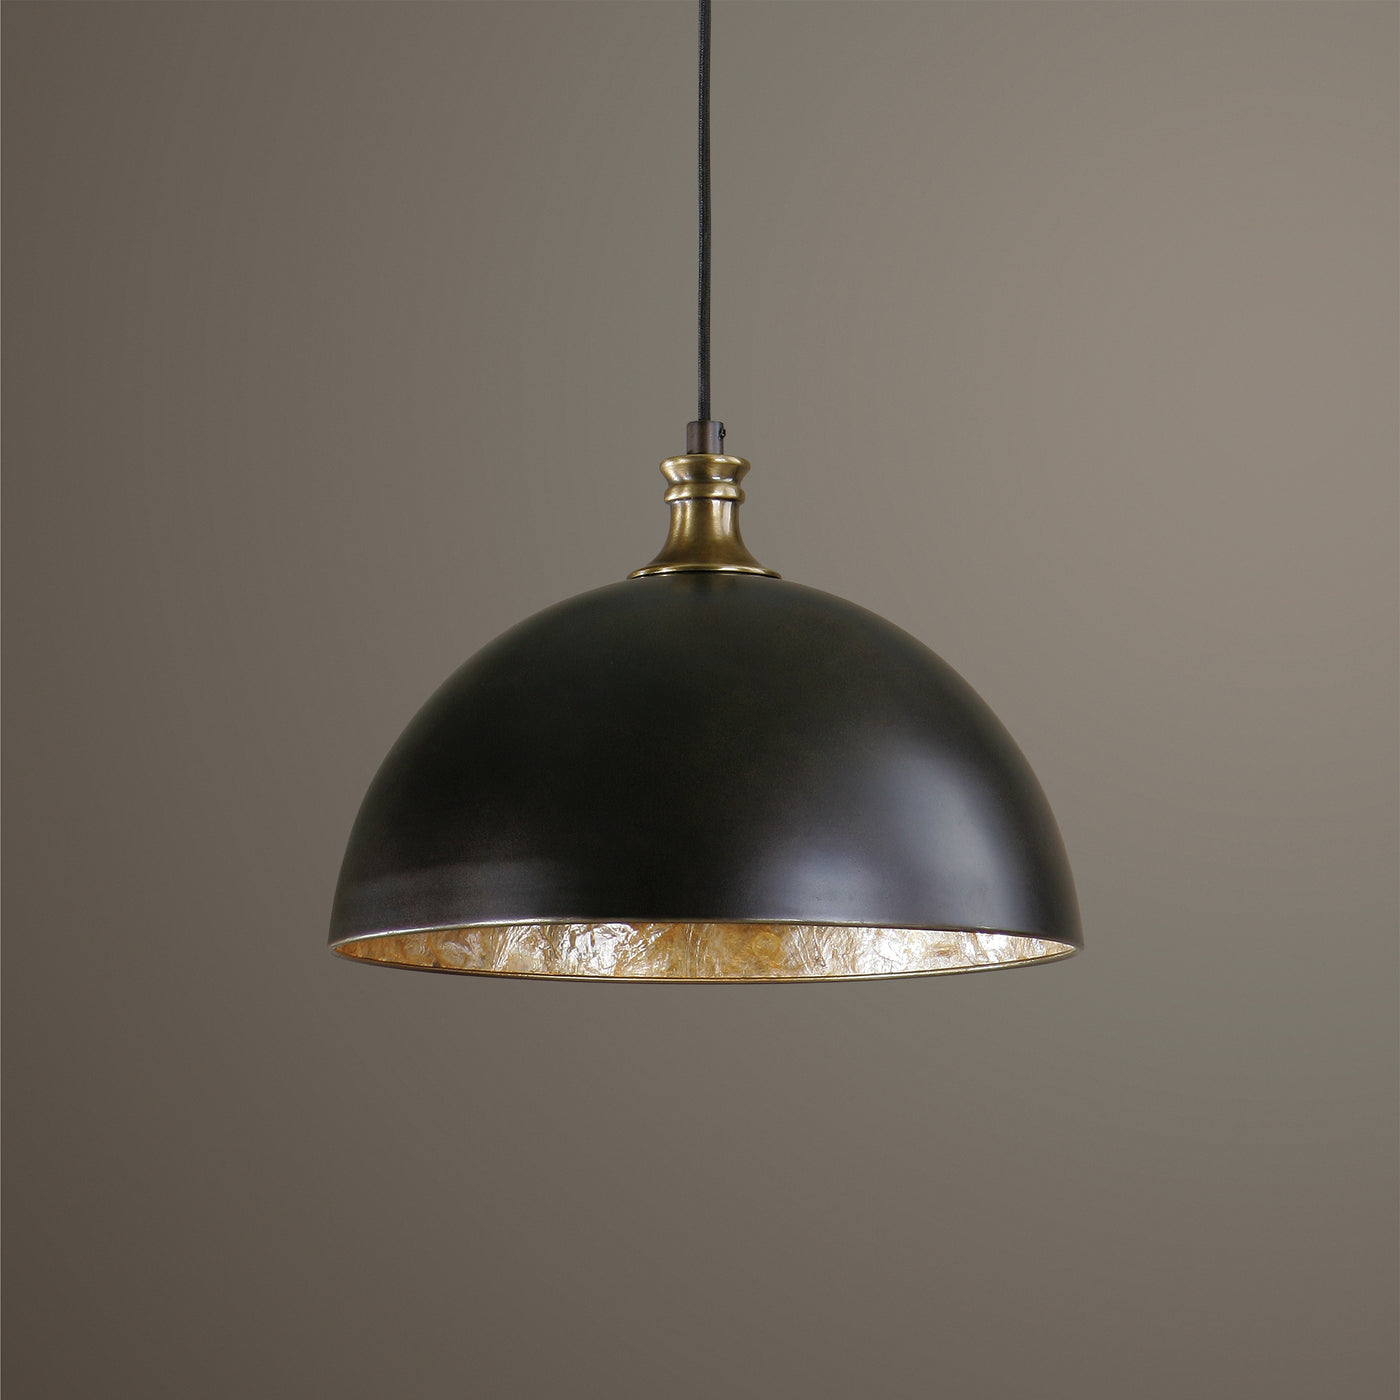 We Have Taken The Simple Look Of A Metal Dome Pendant In A Pacific Bronze Finish With Antique Brass Accents And Have Added...